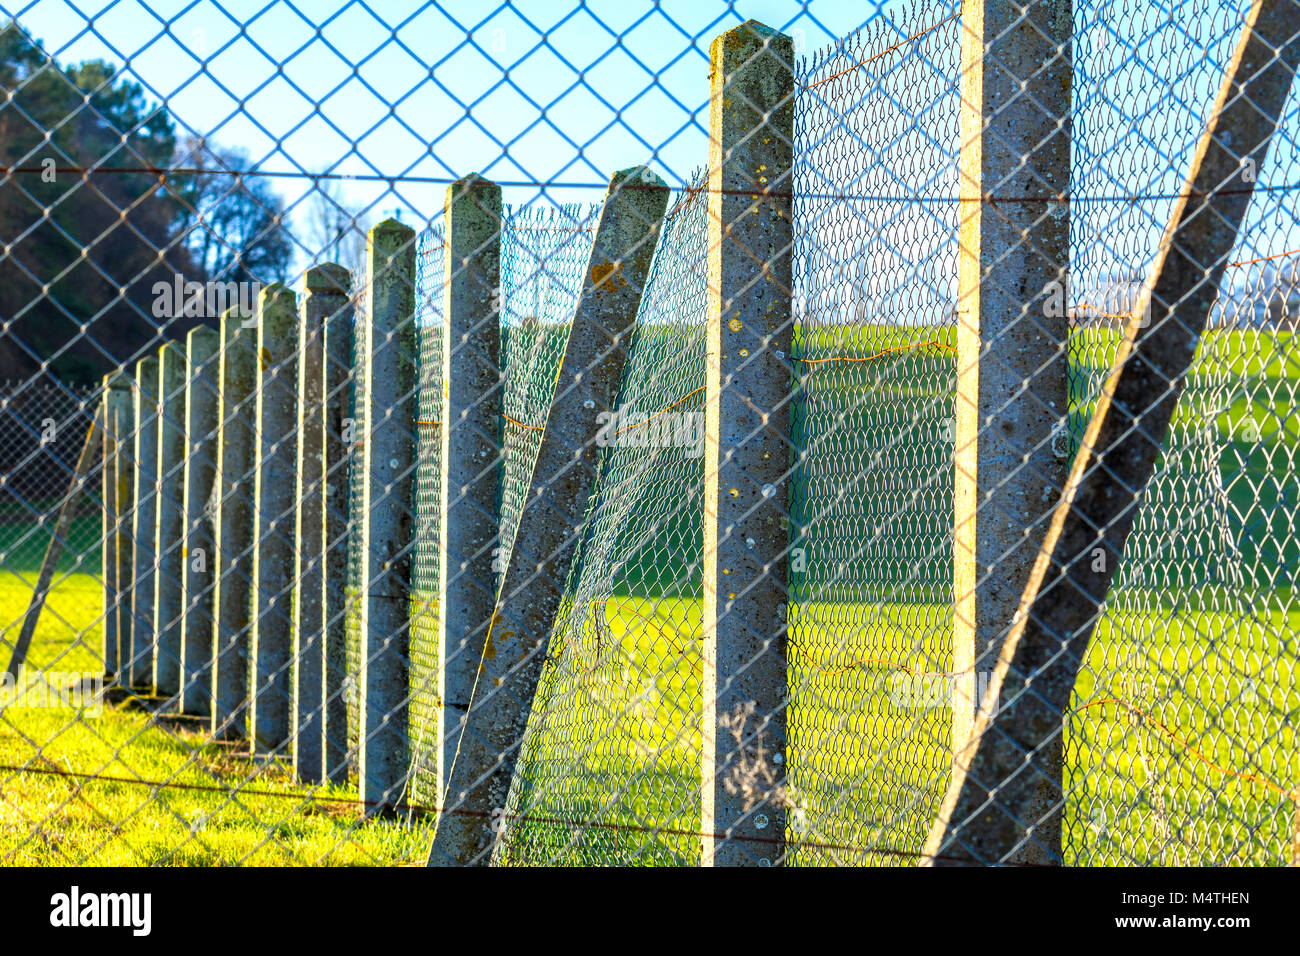 Wire netting on concrete posts. Stock Photo